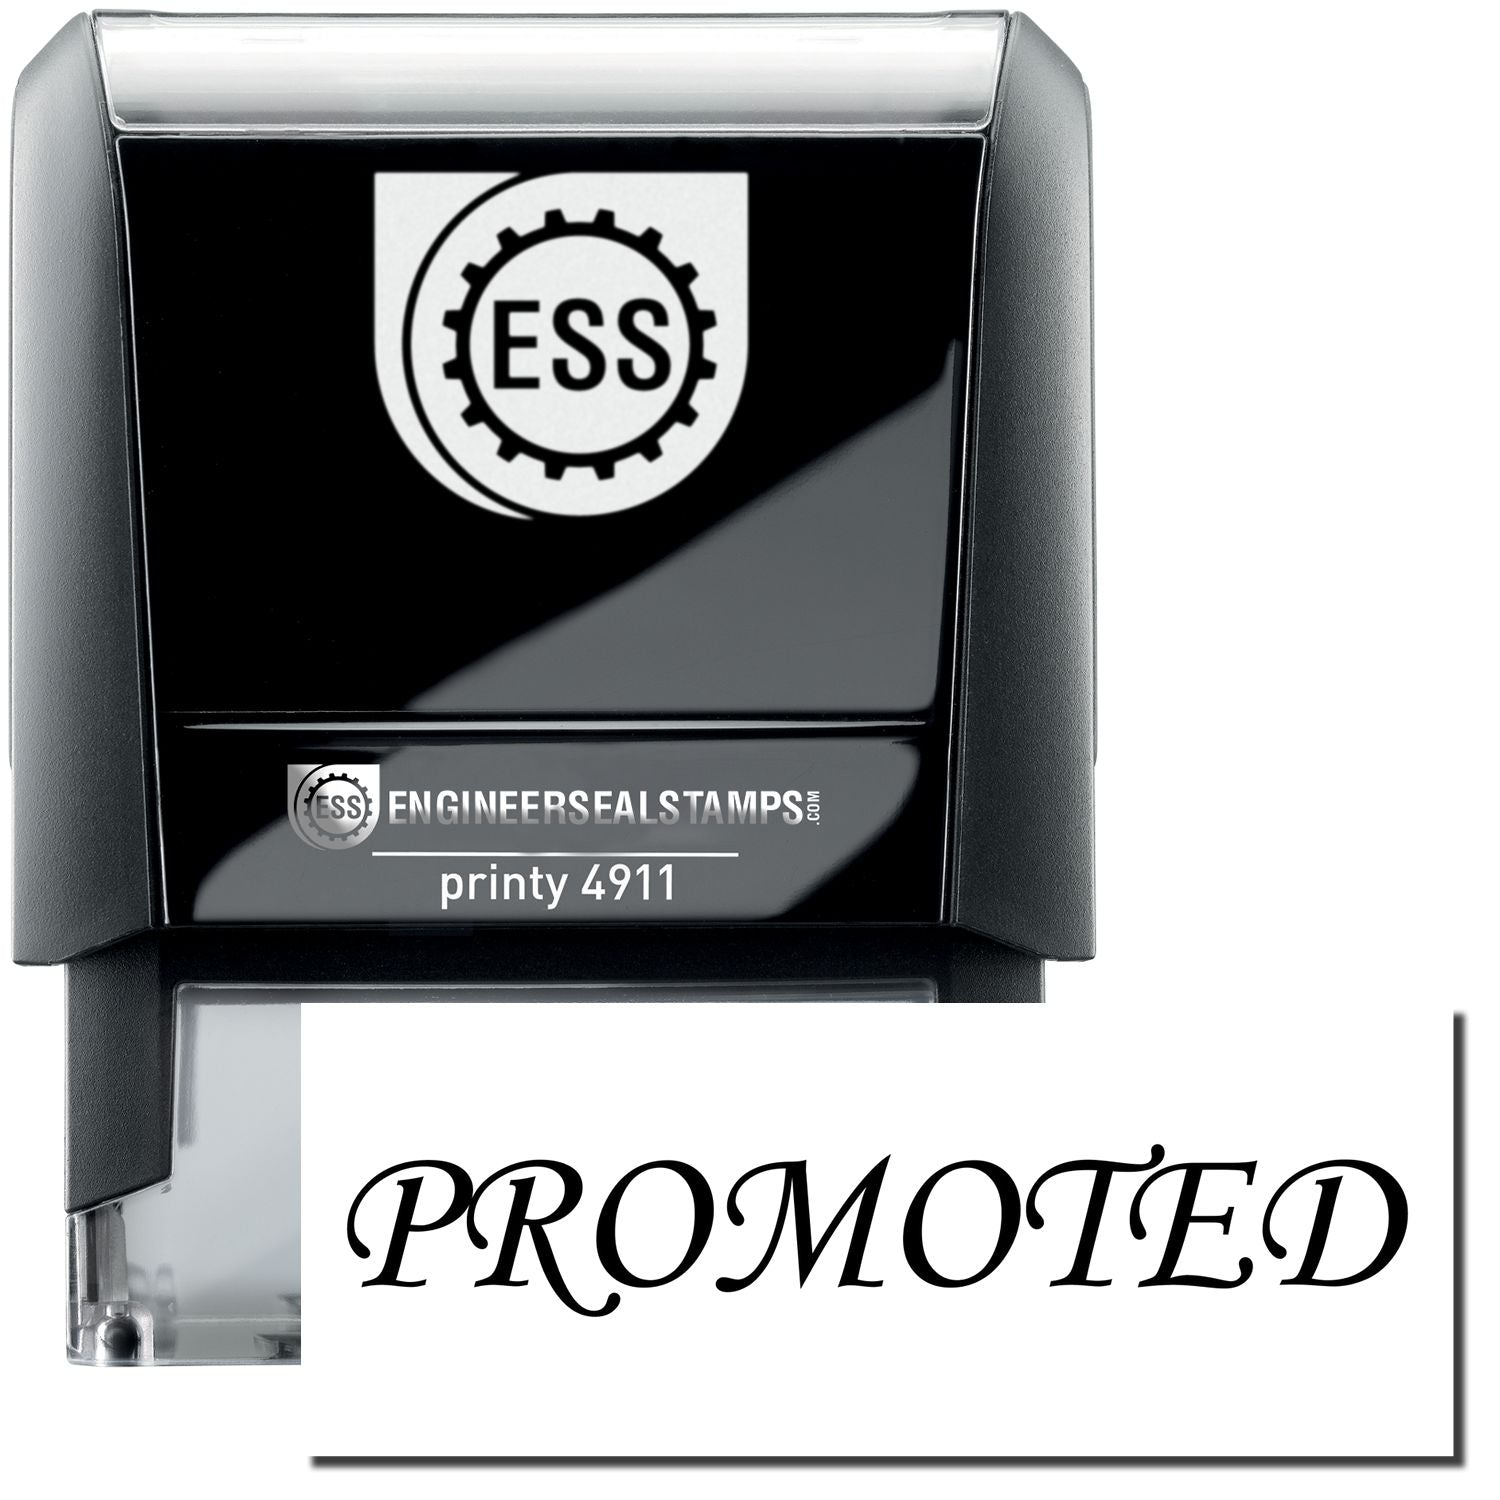 A self-inking stamp with a stamped image showing how the text "PROMOTED" is displayed after stamping.